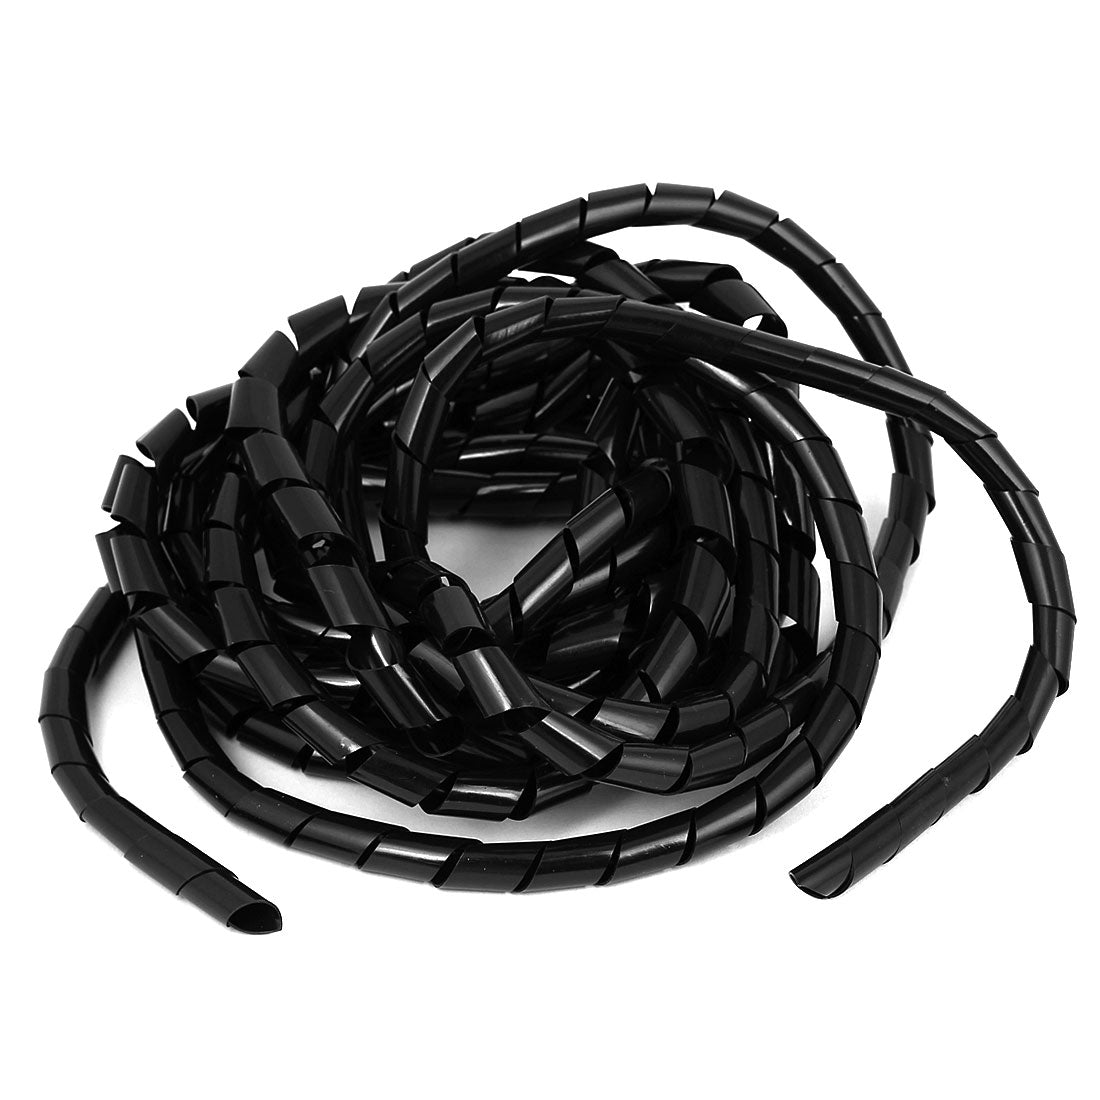 uxcell Uxcell PC Cinema TV Cable Wire Binding Tidy Wrap Spiral Wrapping Band Tie 11mm 20.5Ft